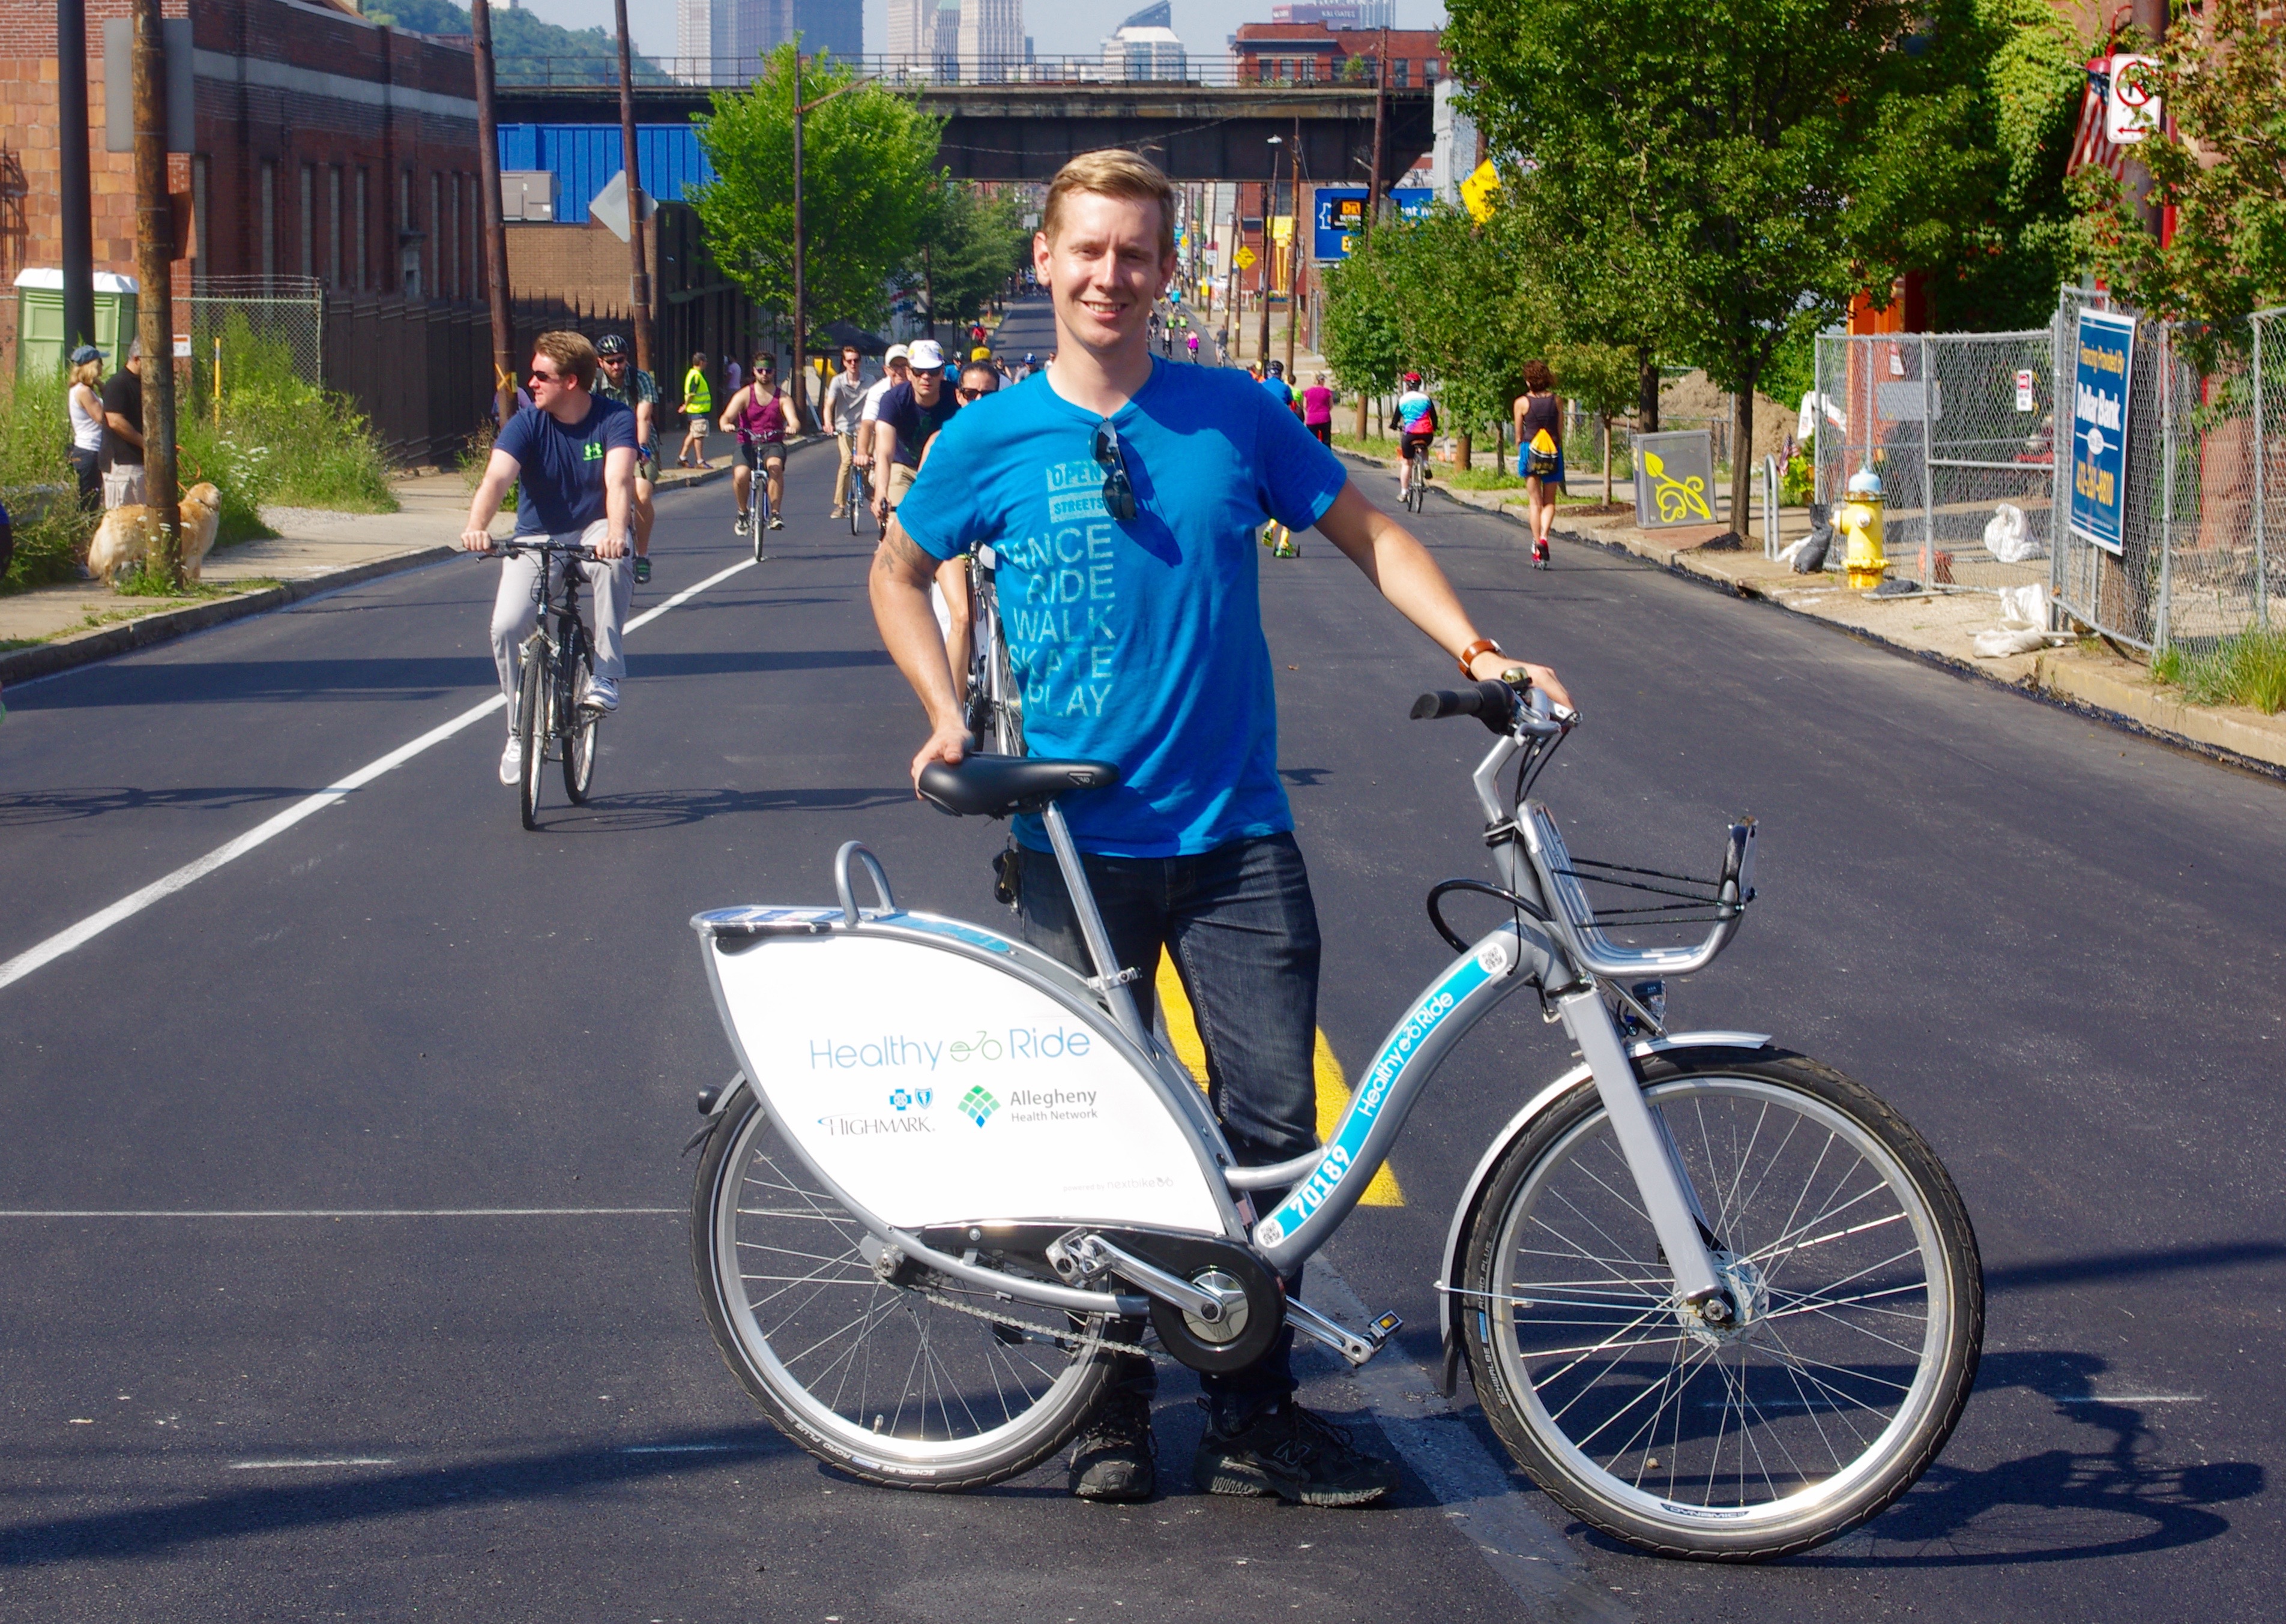 Mike Carroll, event manager for BikePGH, kept an eye on activities while riding a Healthy Ride bike share bicycle.